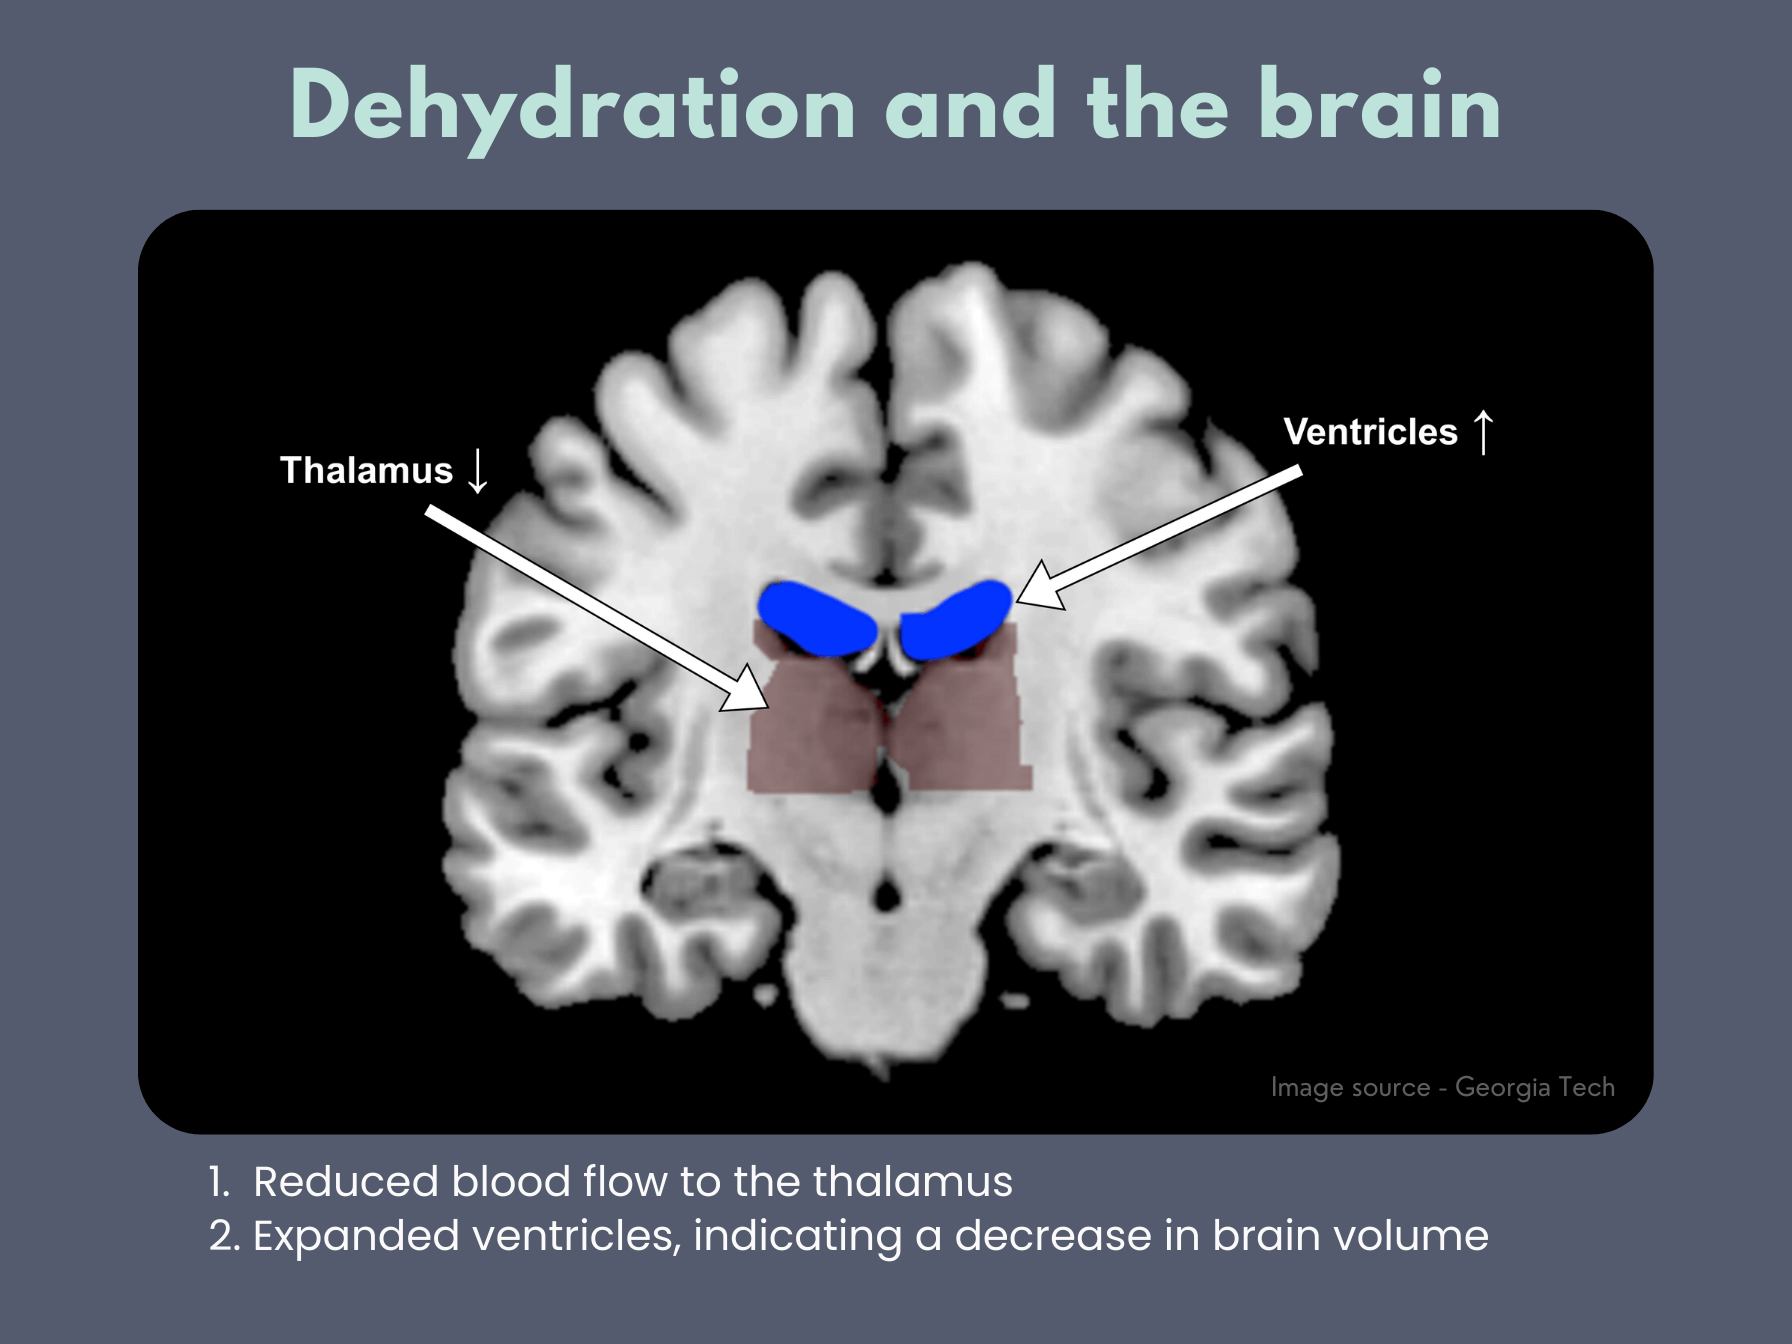 Dehydration and the brain. Image from georgia tech shows a brain scan highlighting expanded ventricles and decreased thalamus blood flow